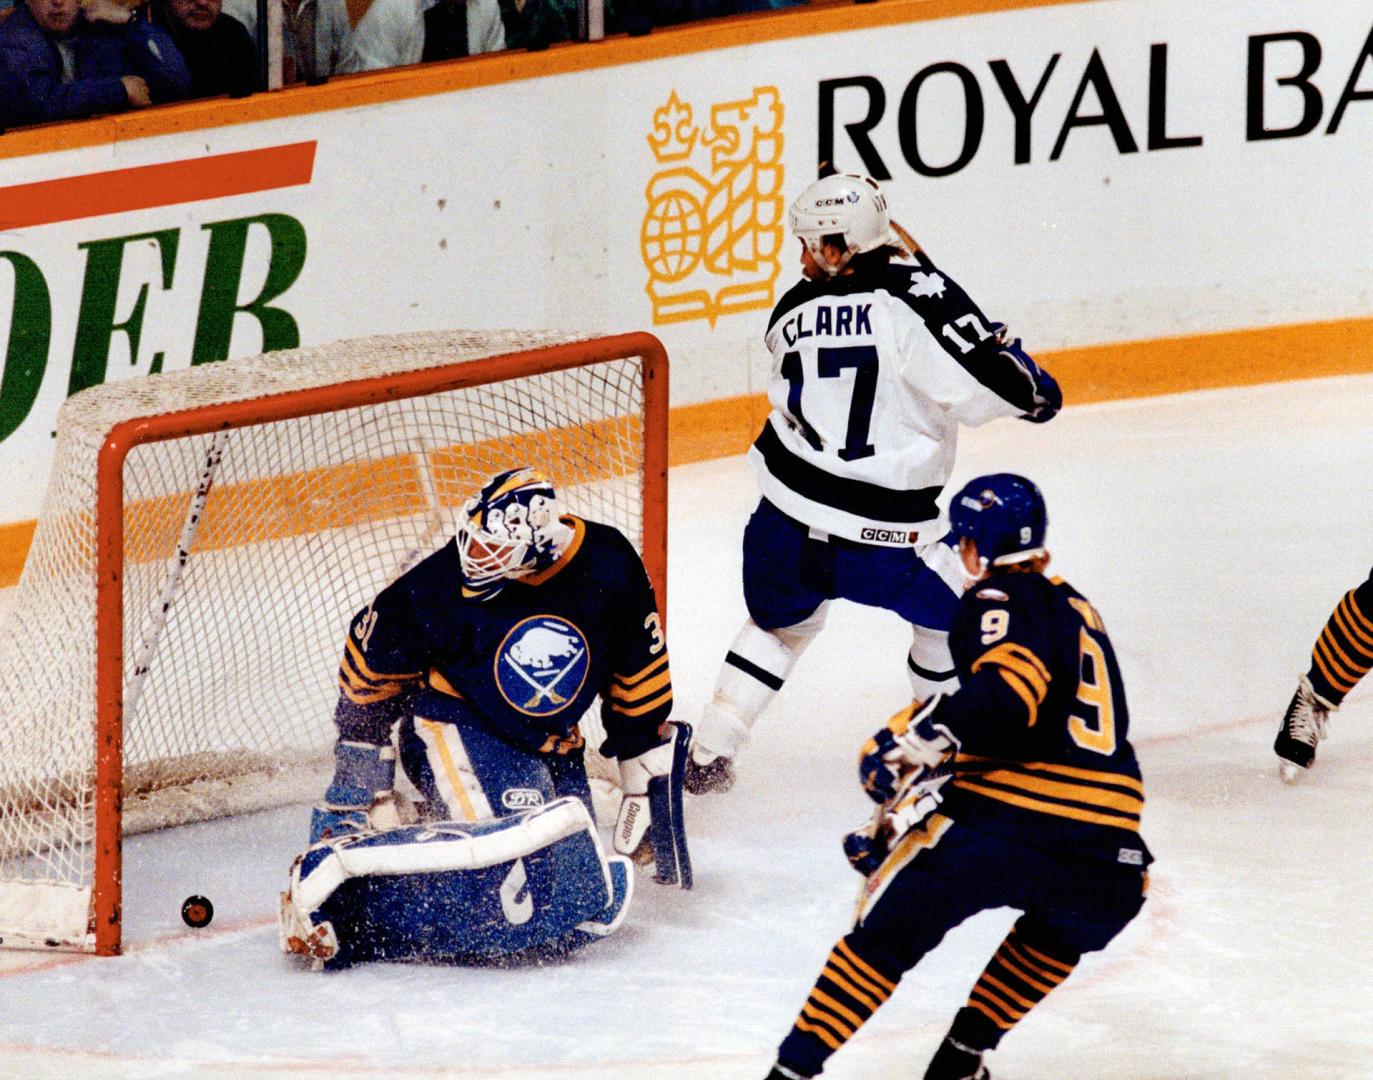 The captain's in charge: Maple Leaf captain Wendel Clark slips the puck past Sabres goalie Daren Puppa at 31 seconds of the first period last night